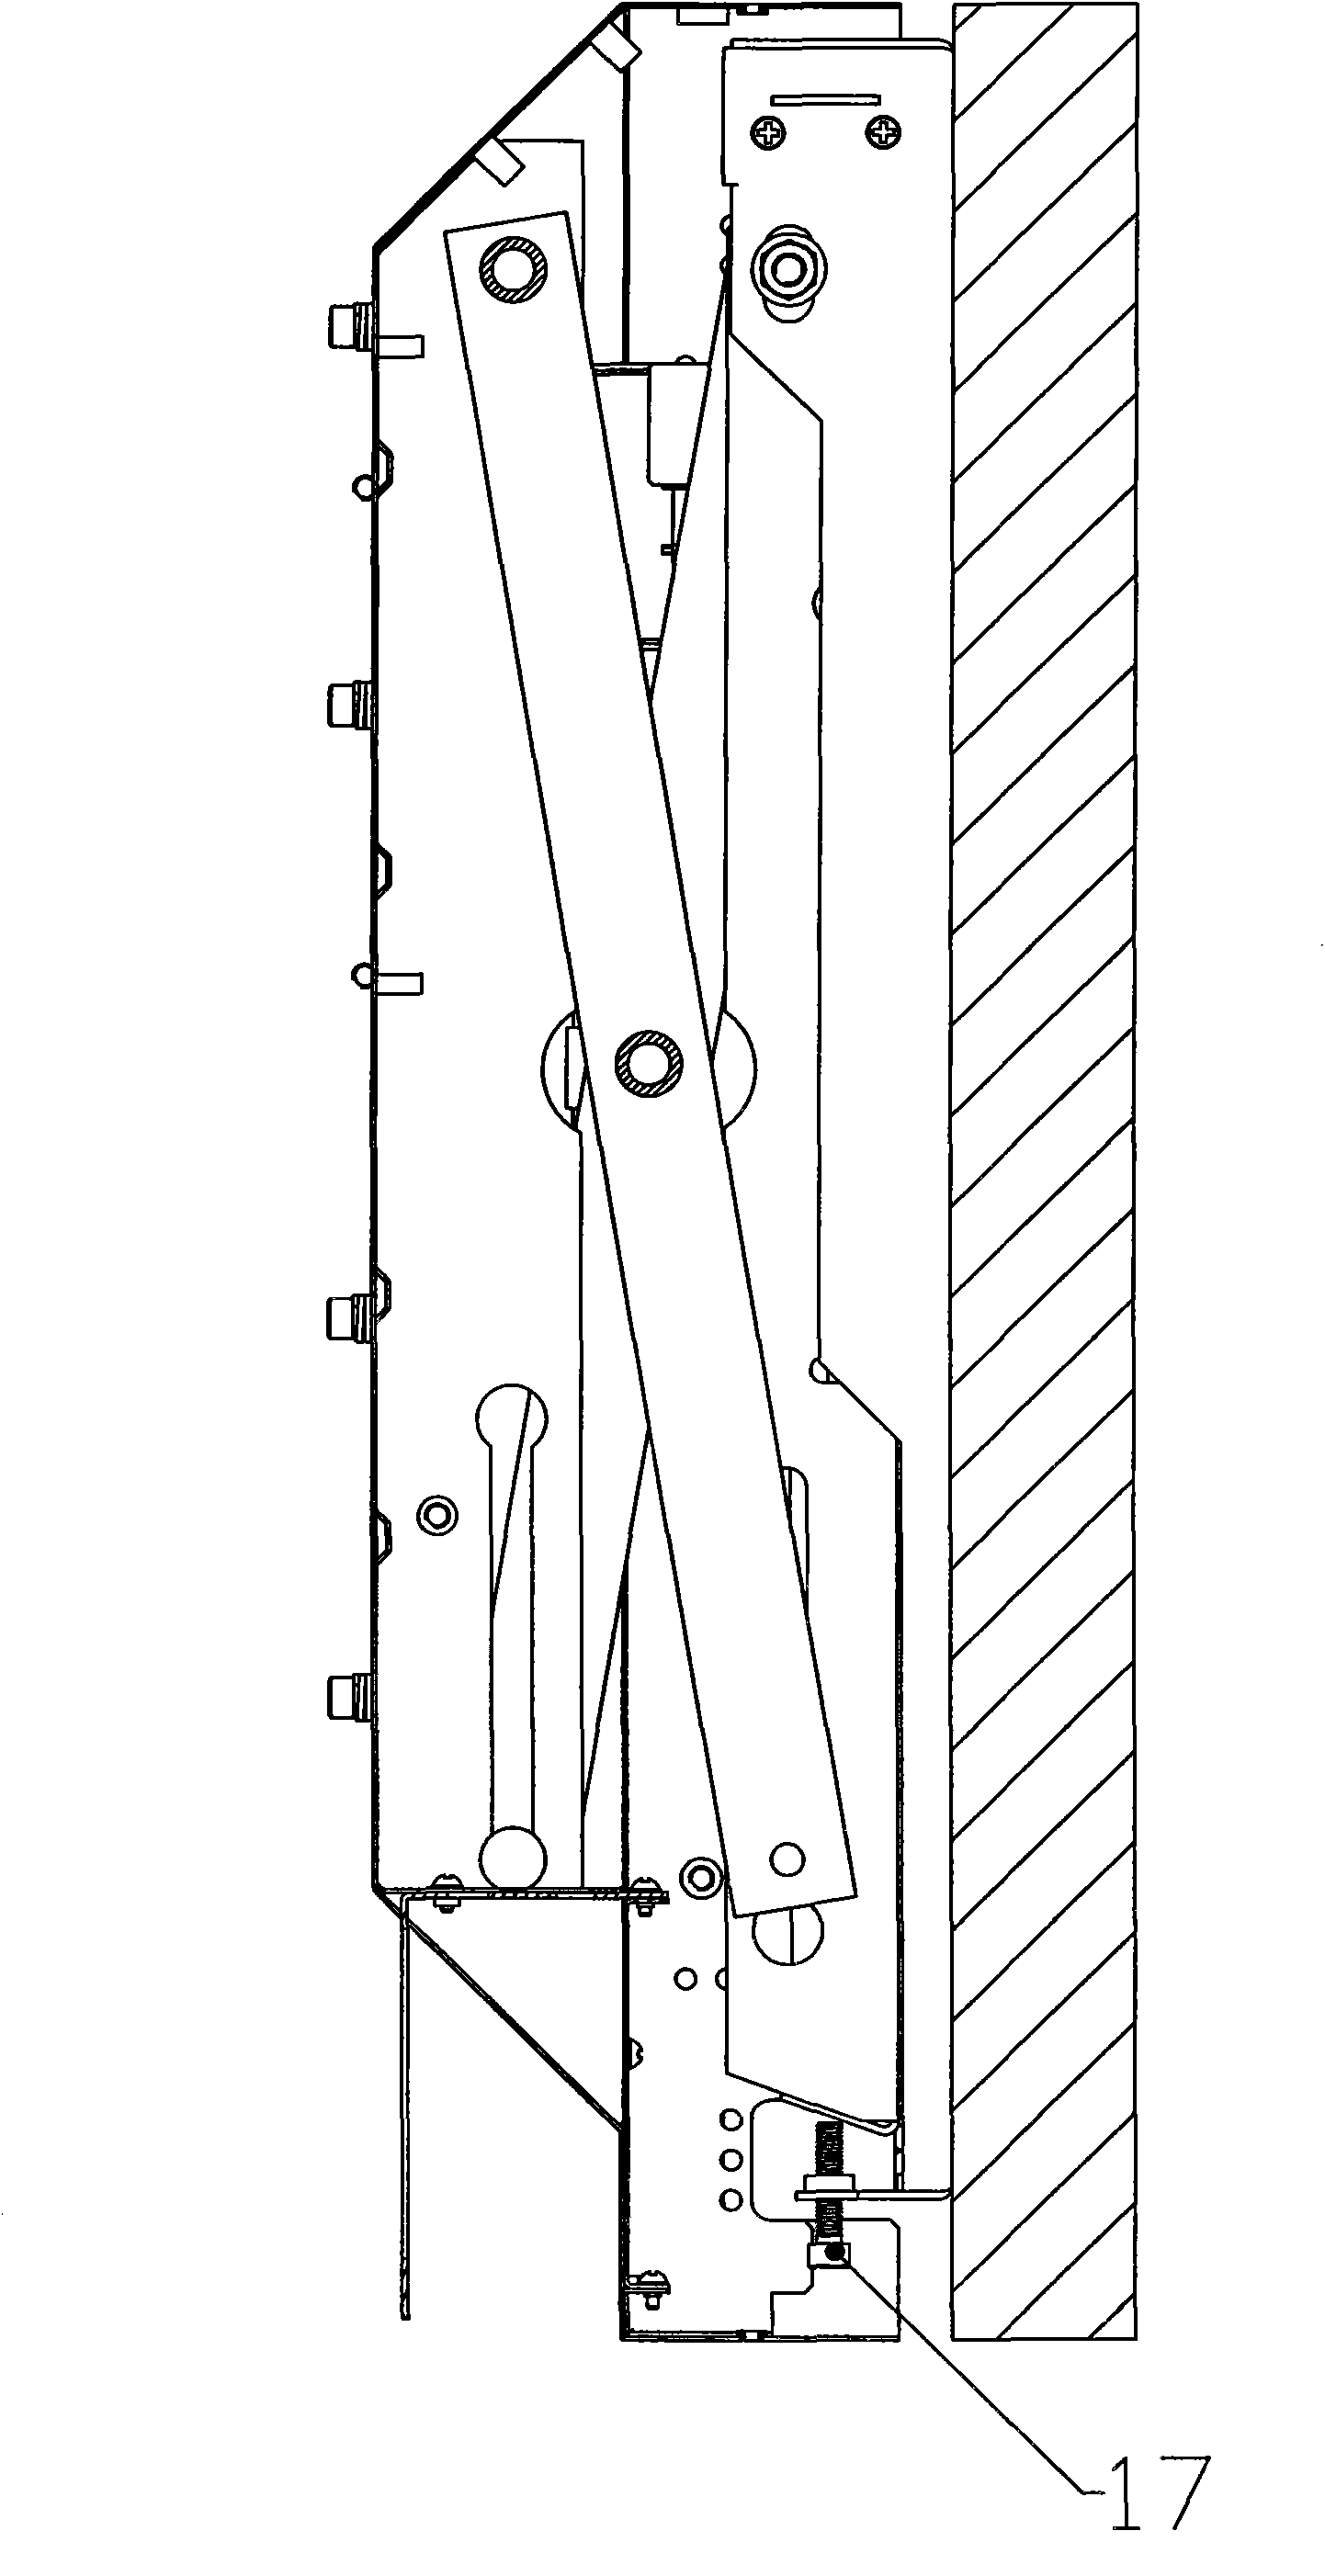 Translational overturning structure of joined screen display unit